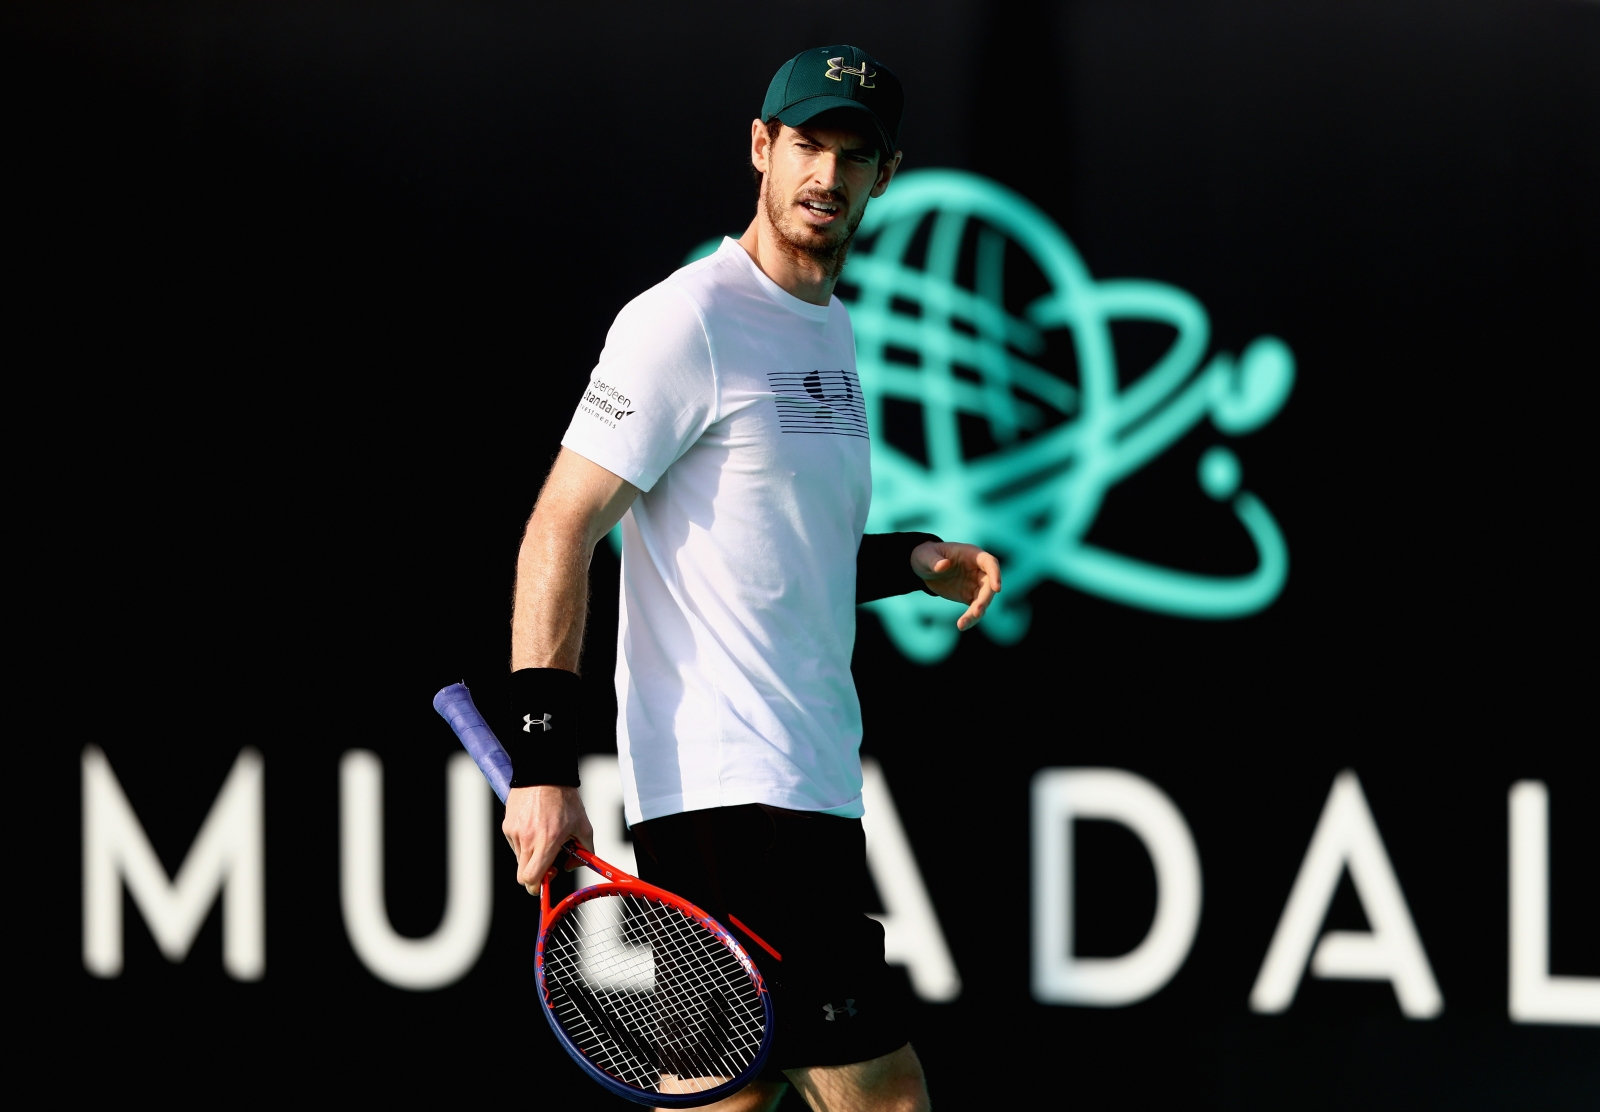 Andy Murray pulls out of Australian Open due to injury as Rafael Nadal